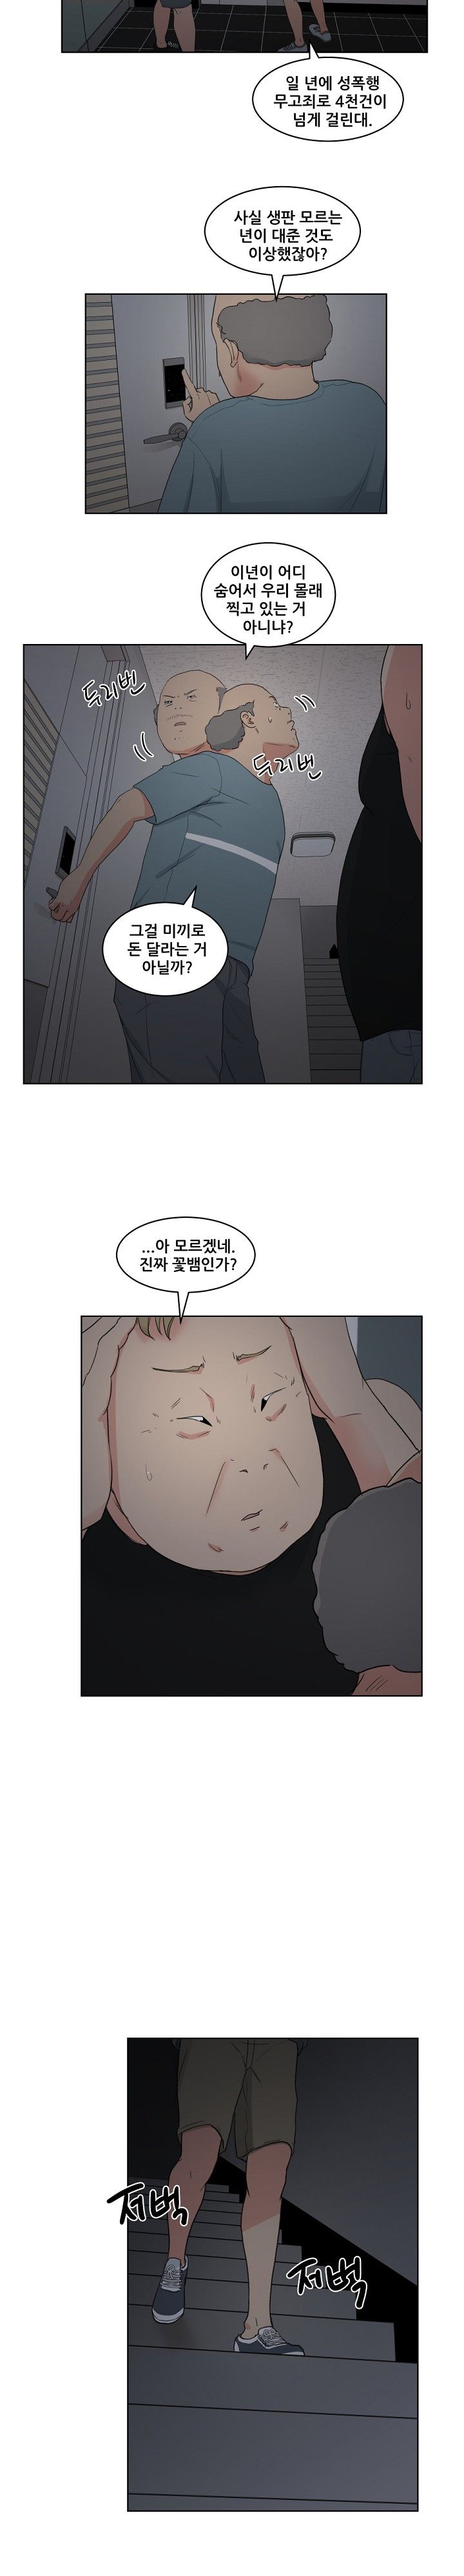 Sooyung Comic Shop Raw - Chapter 5 Page 3